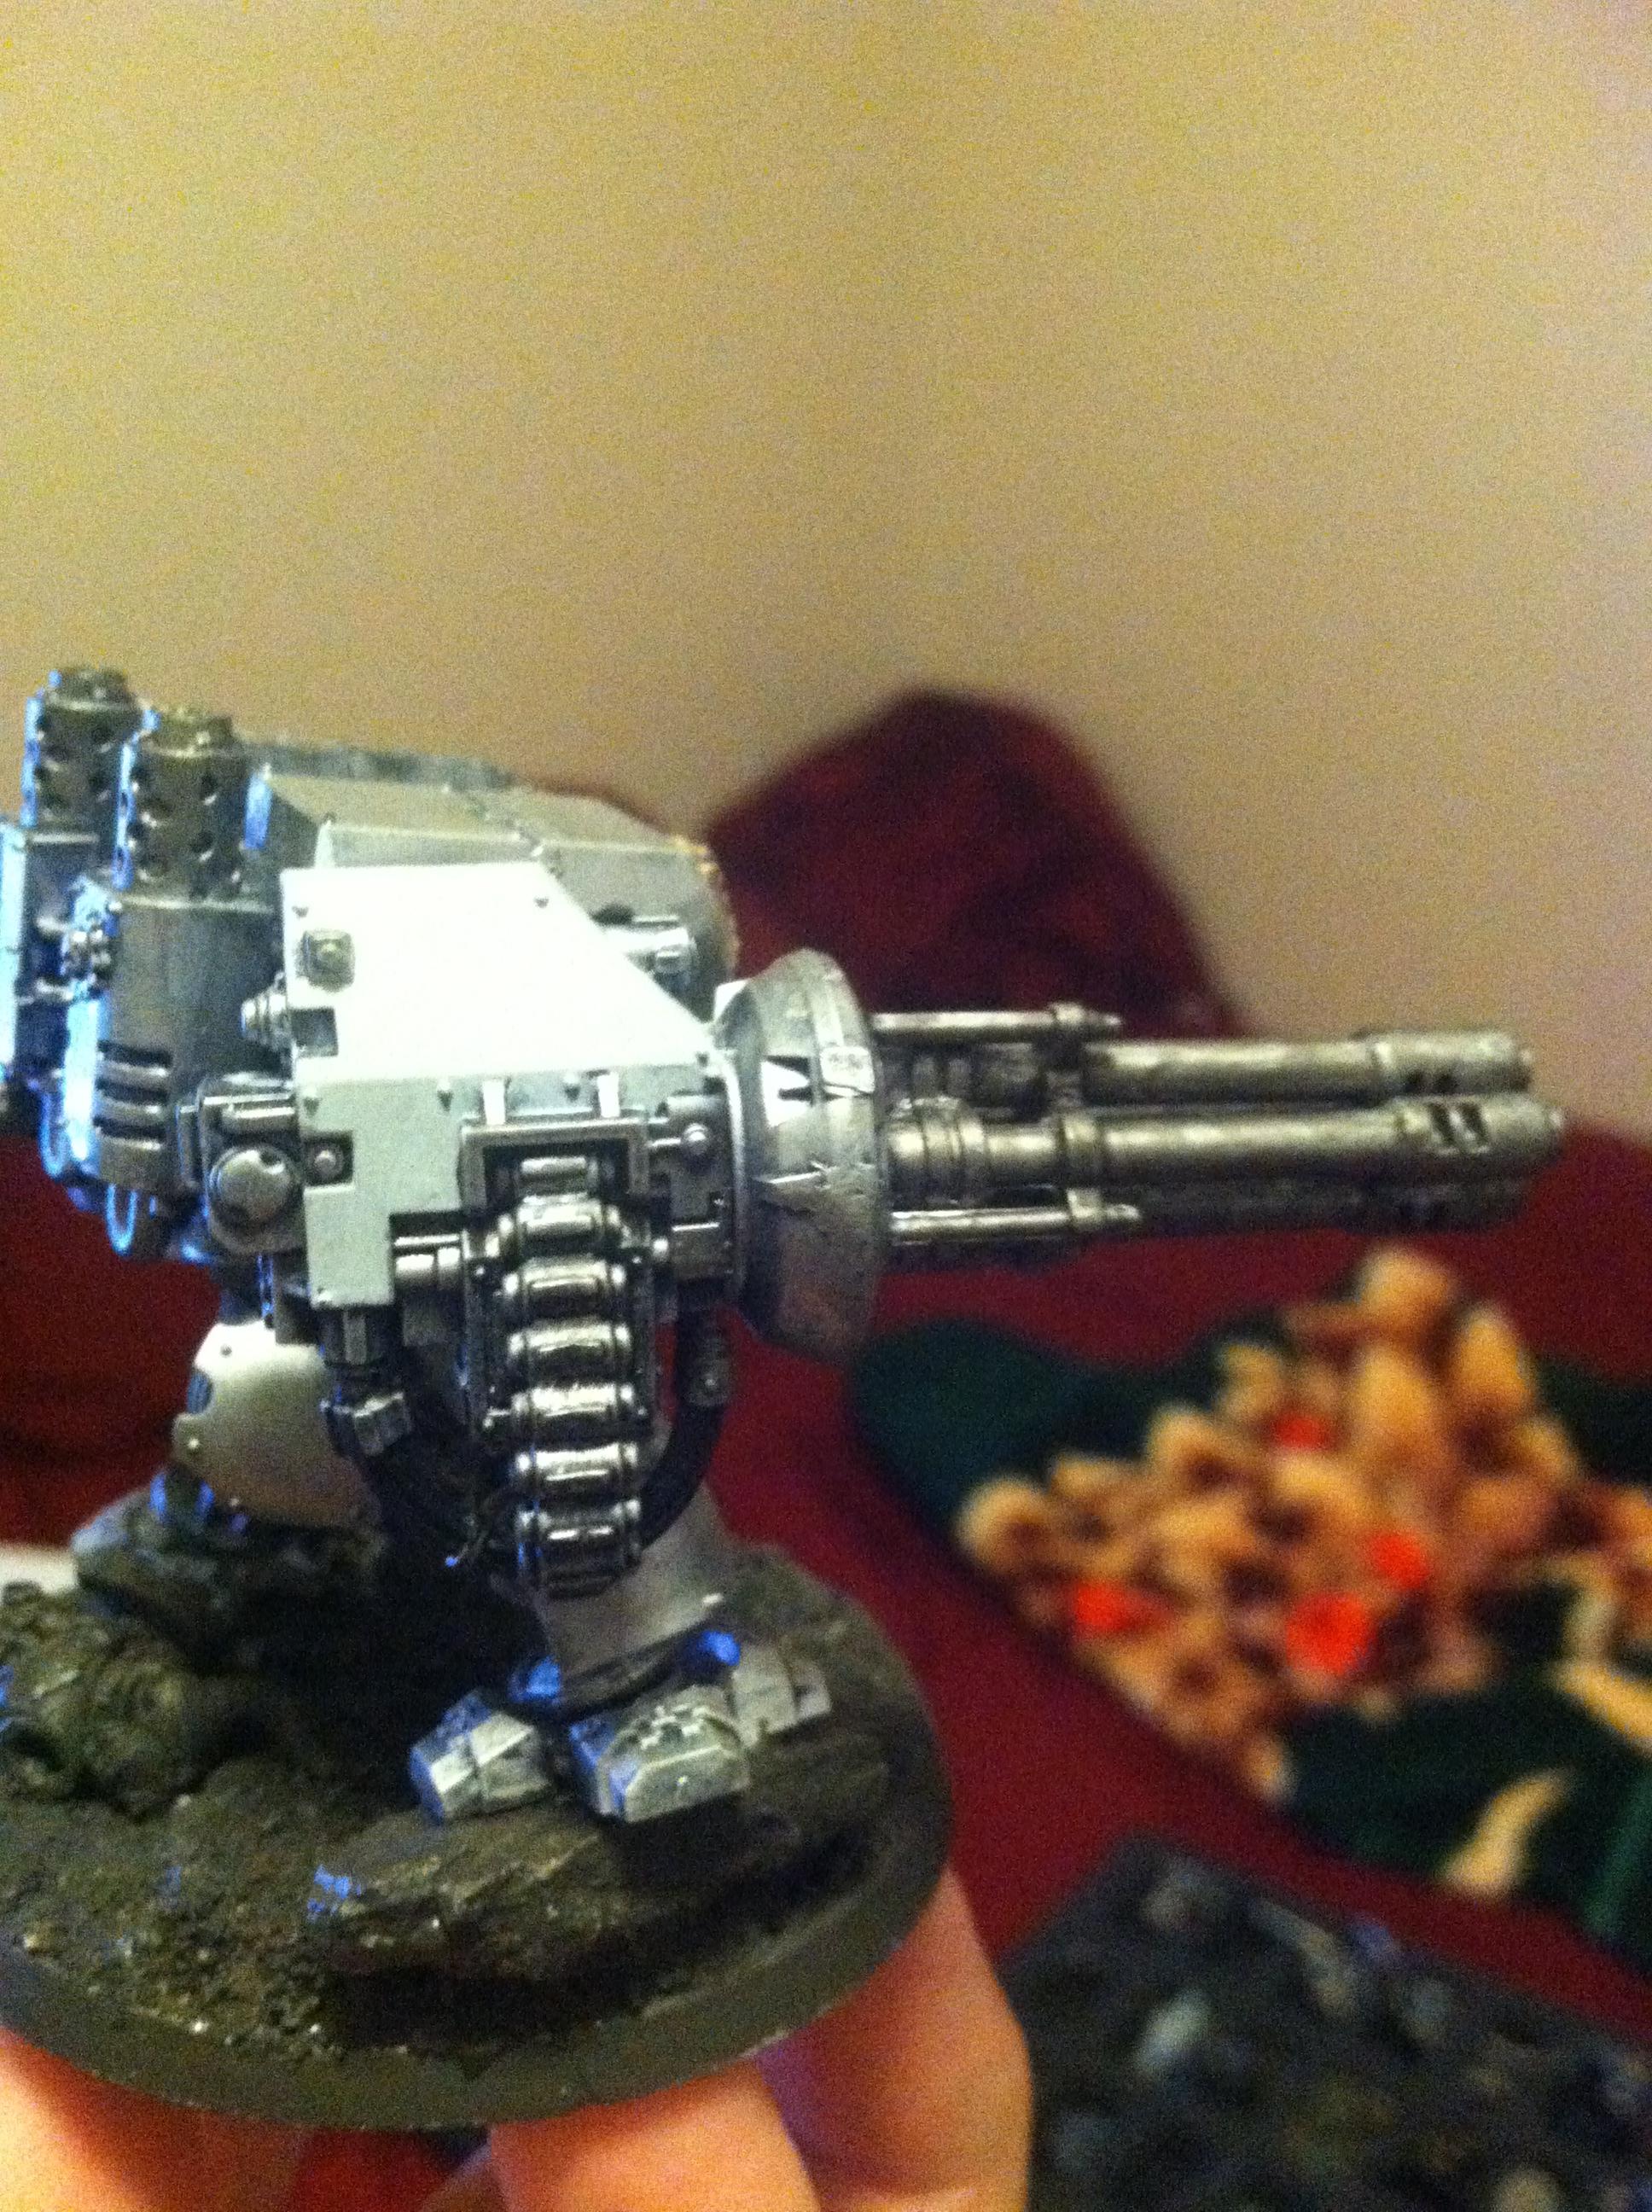 Excelent view of of the dual autocannon piece